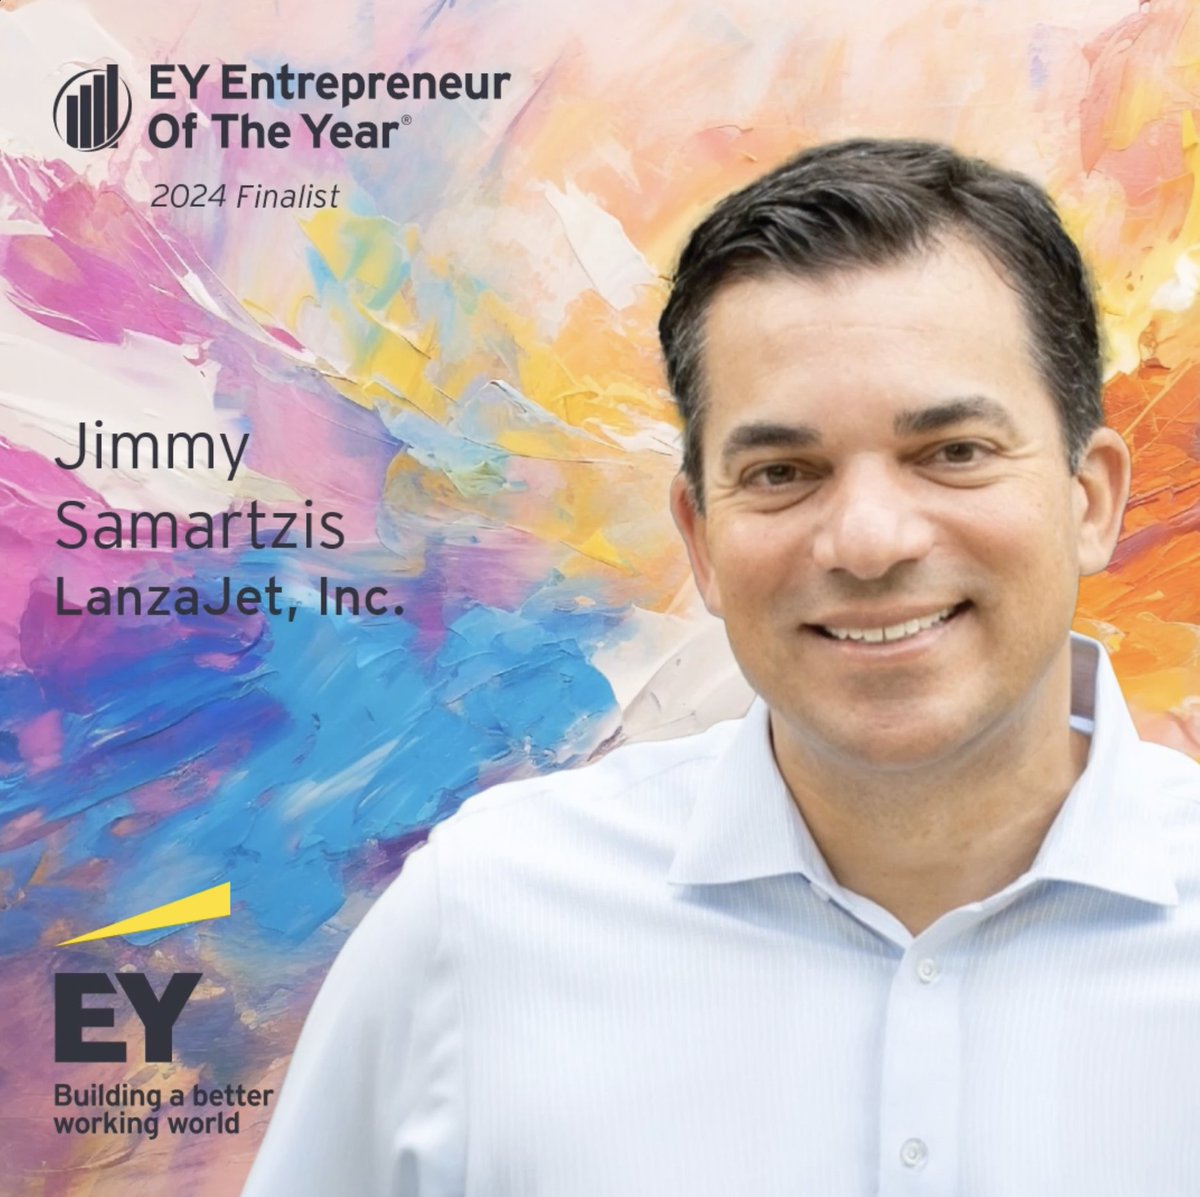 We are proud to announce that our CEO @JimmySamartzis has been named a Midwest finalist in @EY’s Entrepreneur of the Year®. This recognizes Jimmy’s visionary leadership and unwavering commitment to building the Sustainable Aviation Fuels (#SAF) industry. bit.ly/3UcTCGU